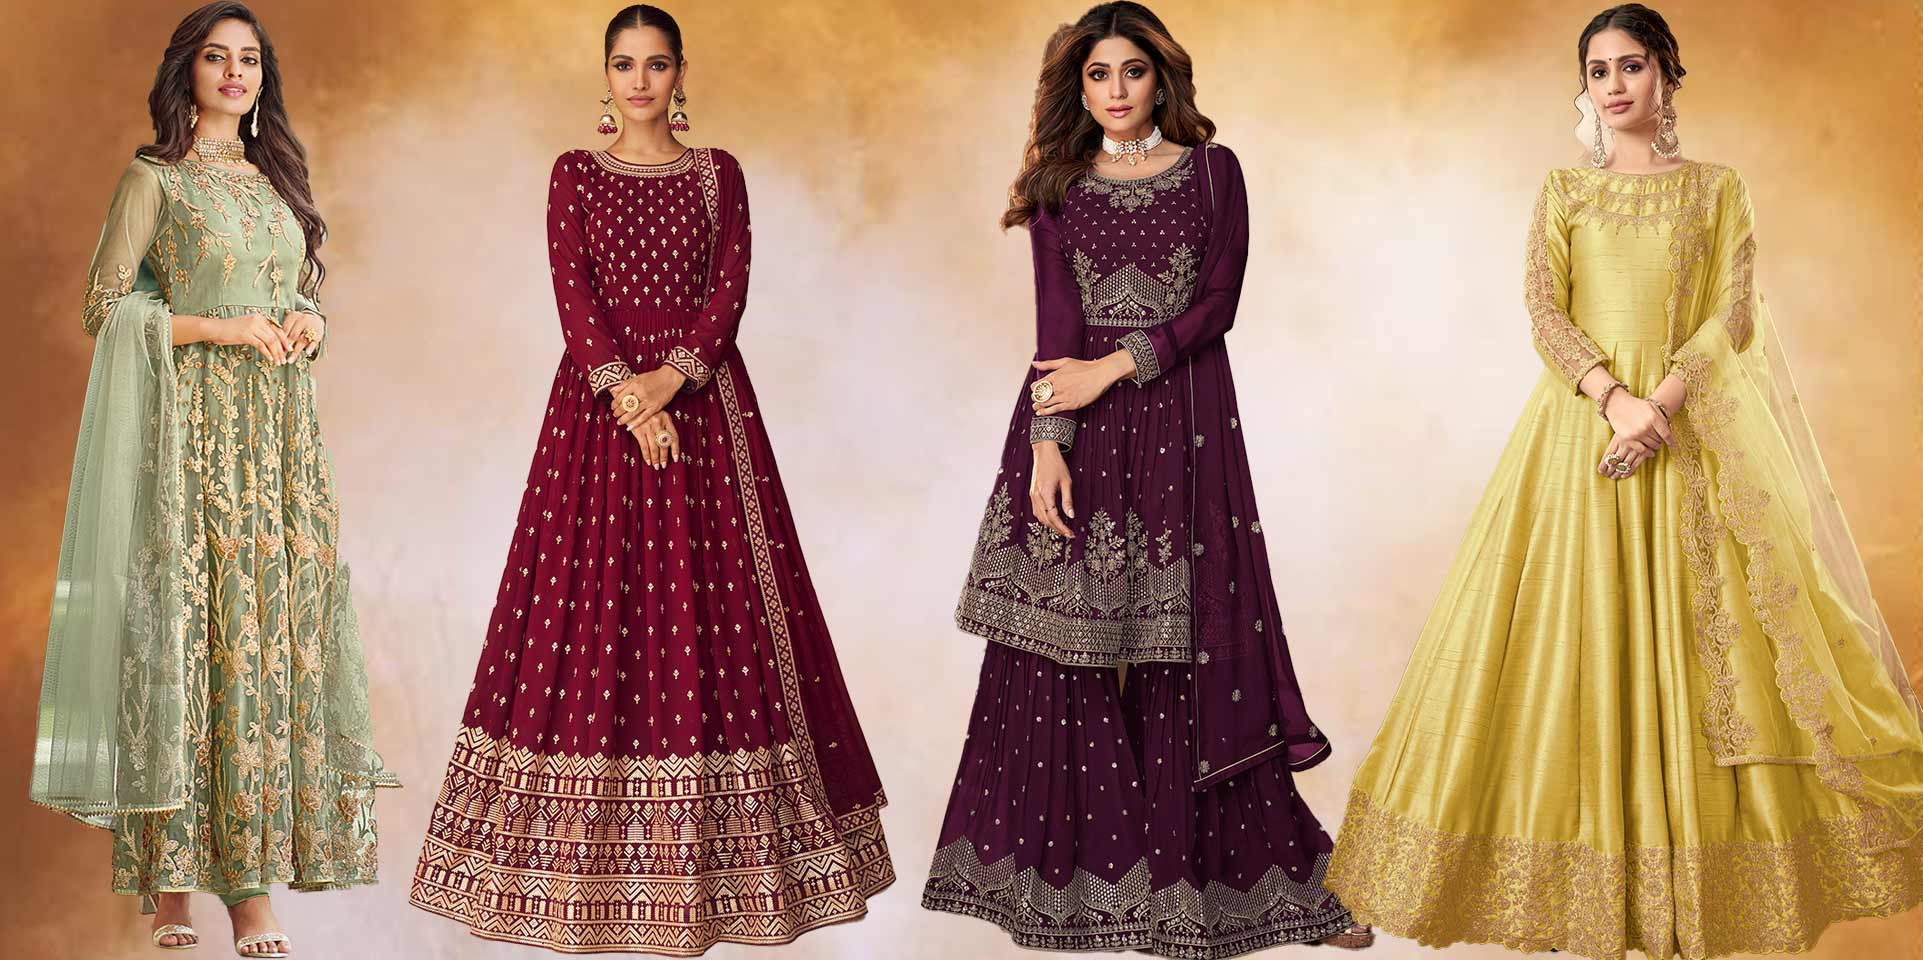 What to Wear to an Indian Wedding As a Guest